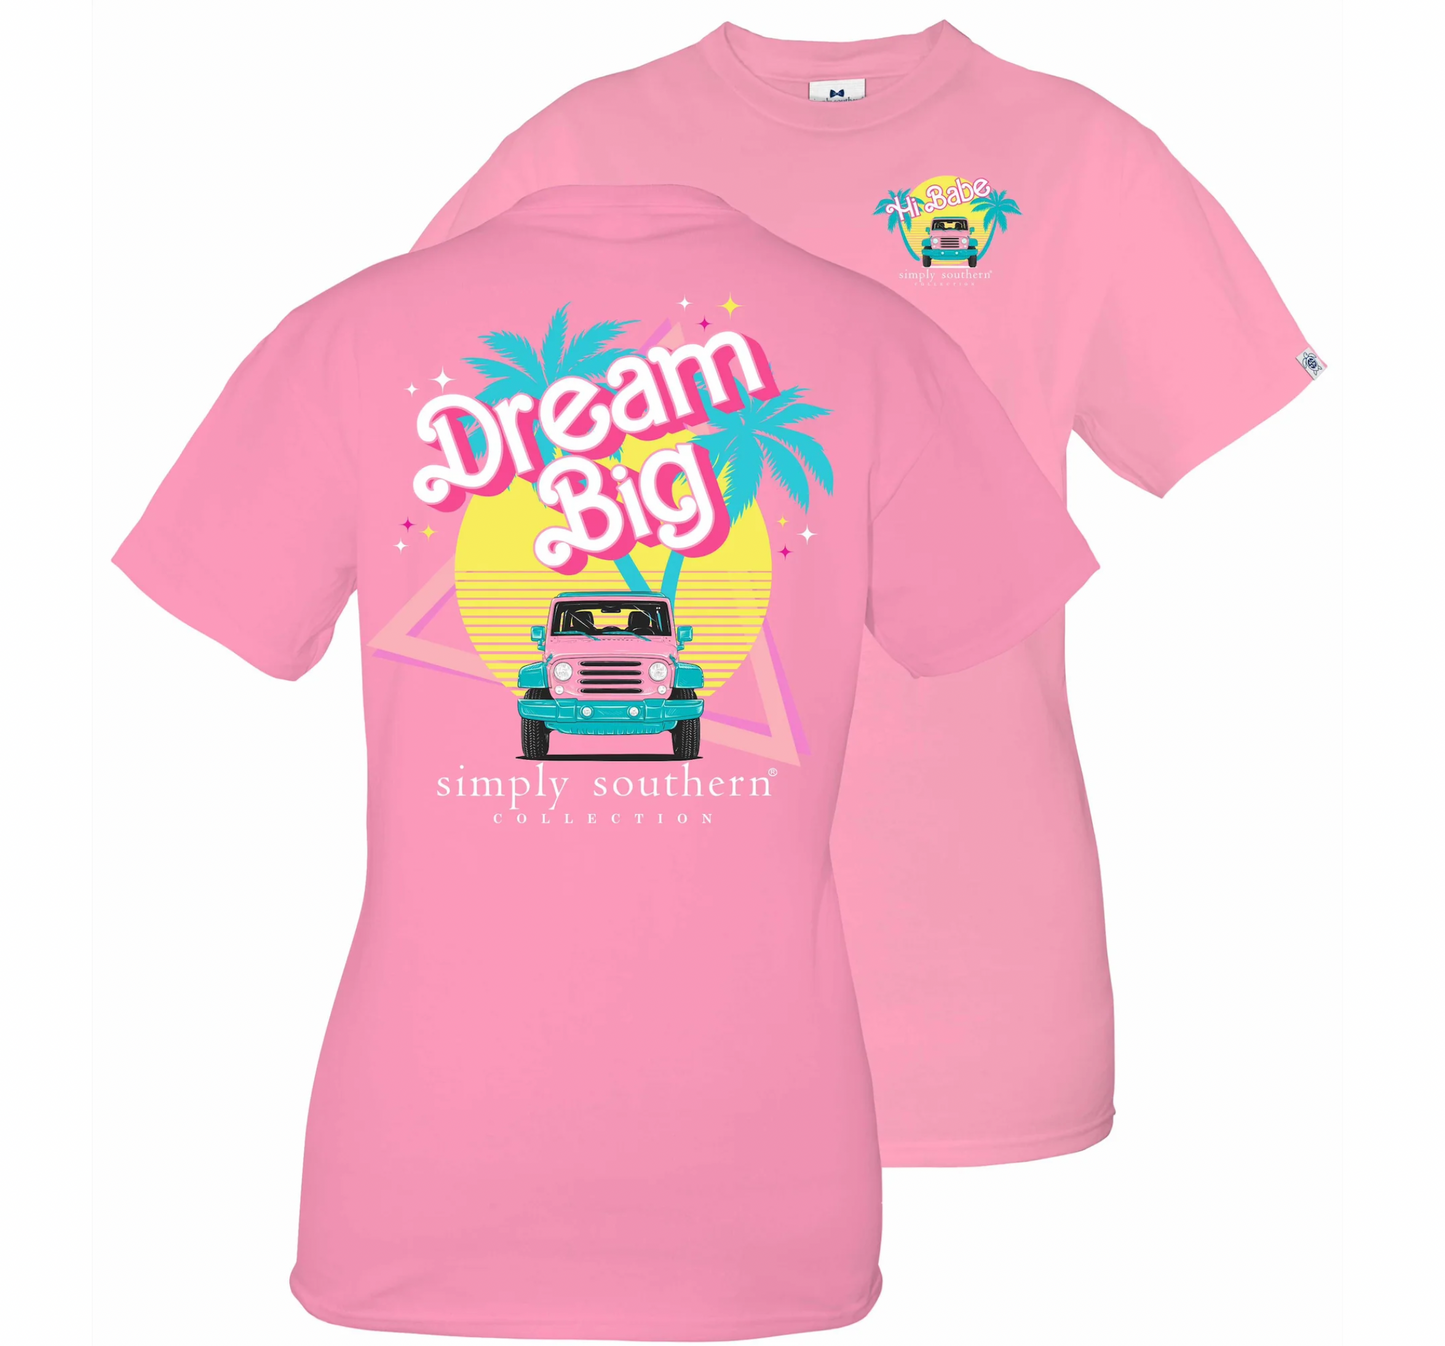 SIMPLY SOUTHERN DREAM BIG BY BARBIE